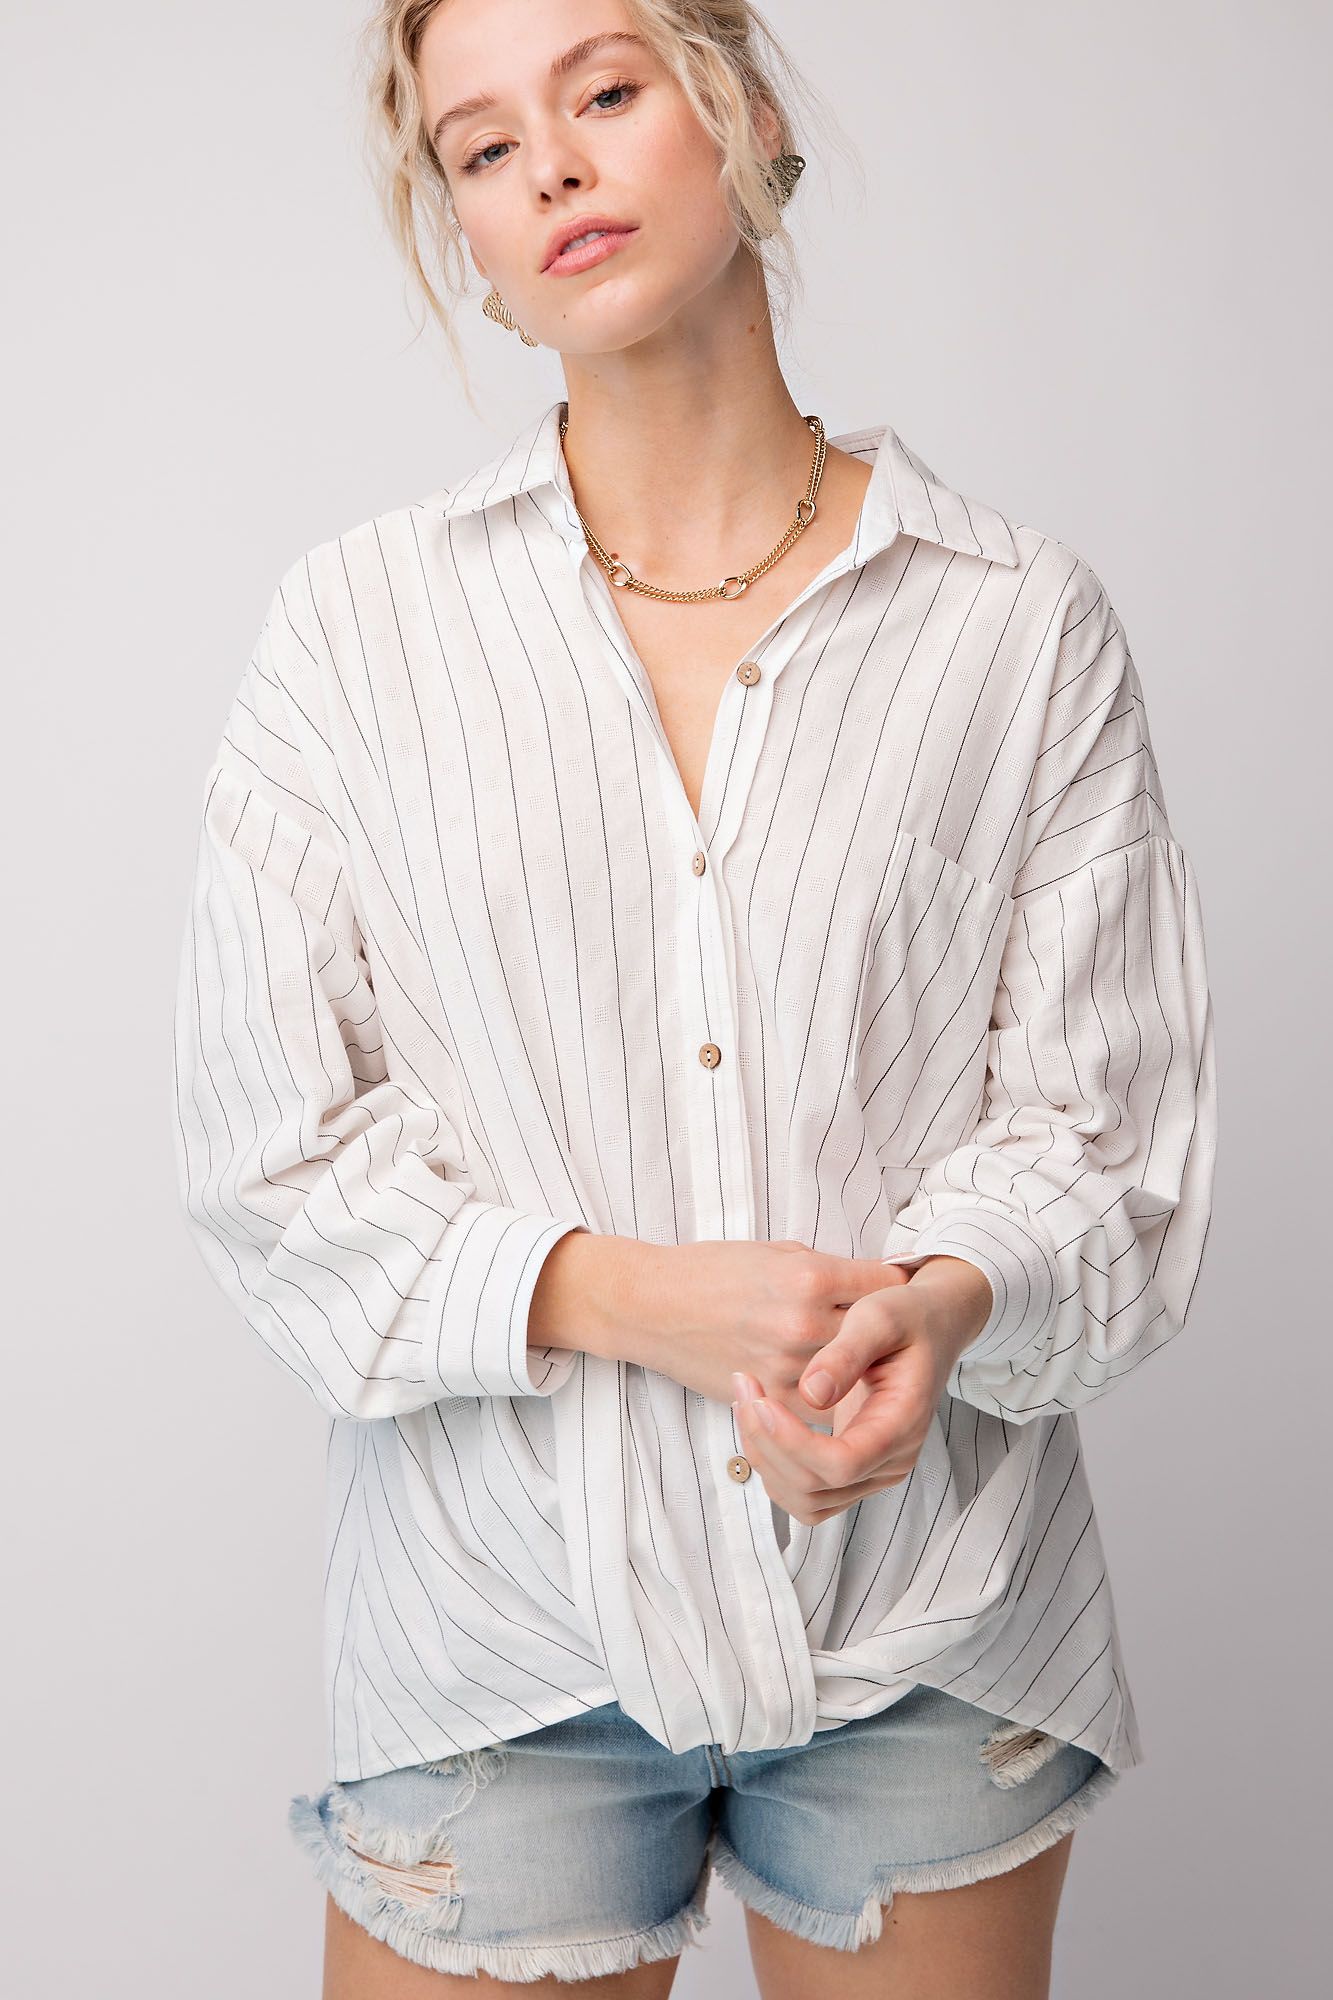 Easel Linen Pinstripe Collared Cuffed Sleeve Twisted Button Down Top